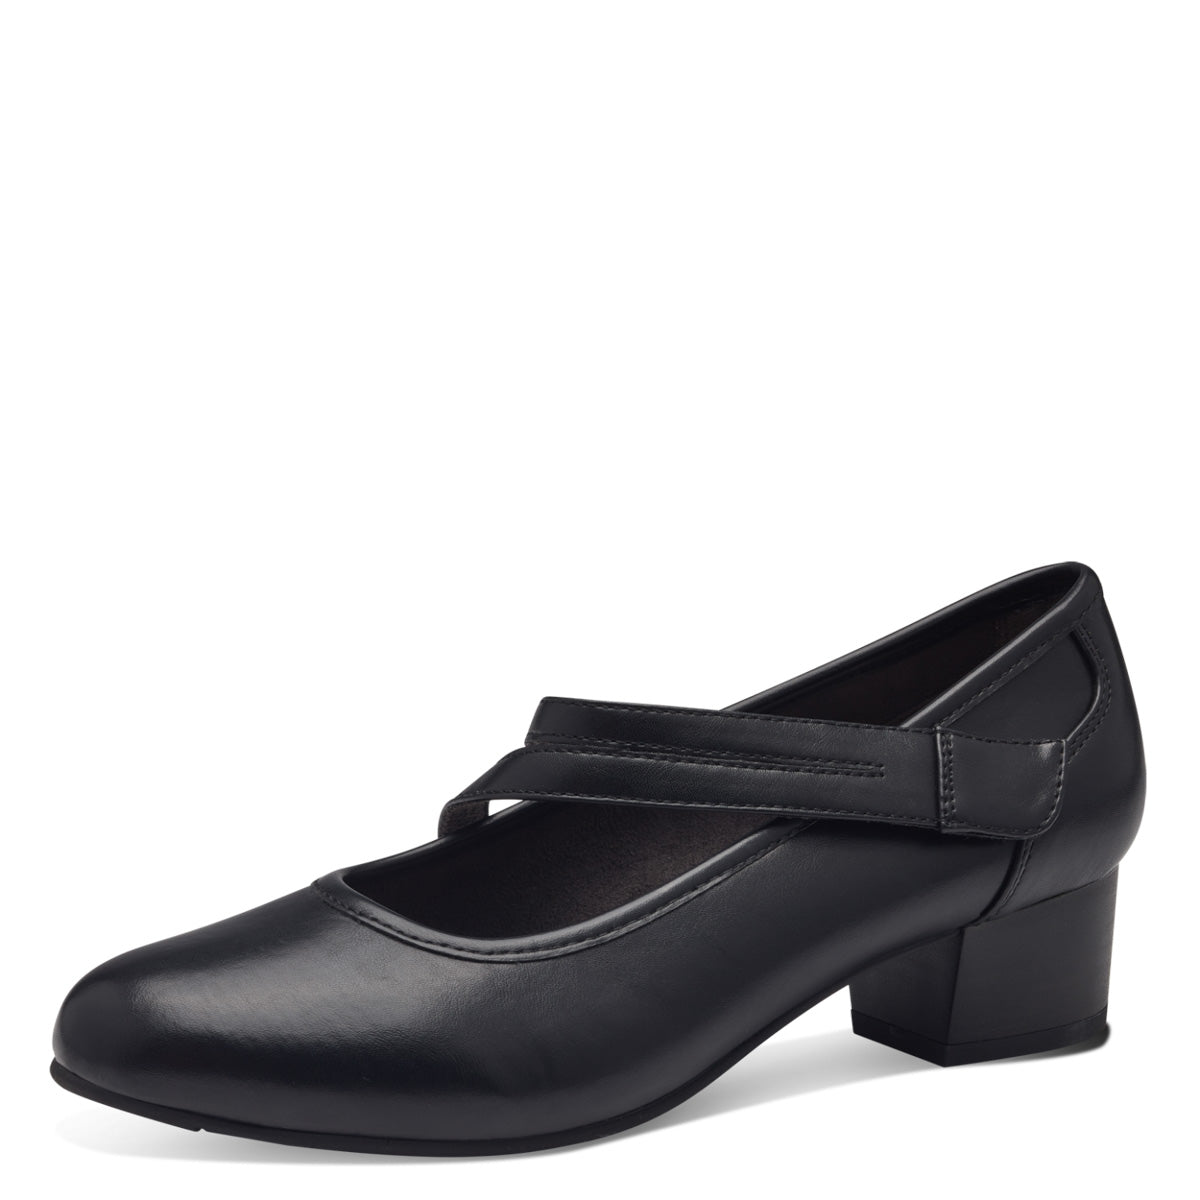 Front view of Jana Black Court Shoe with elasticated strap.